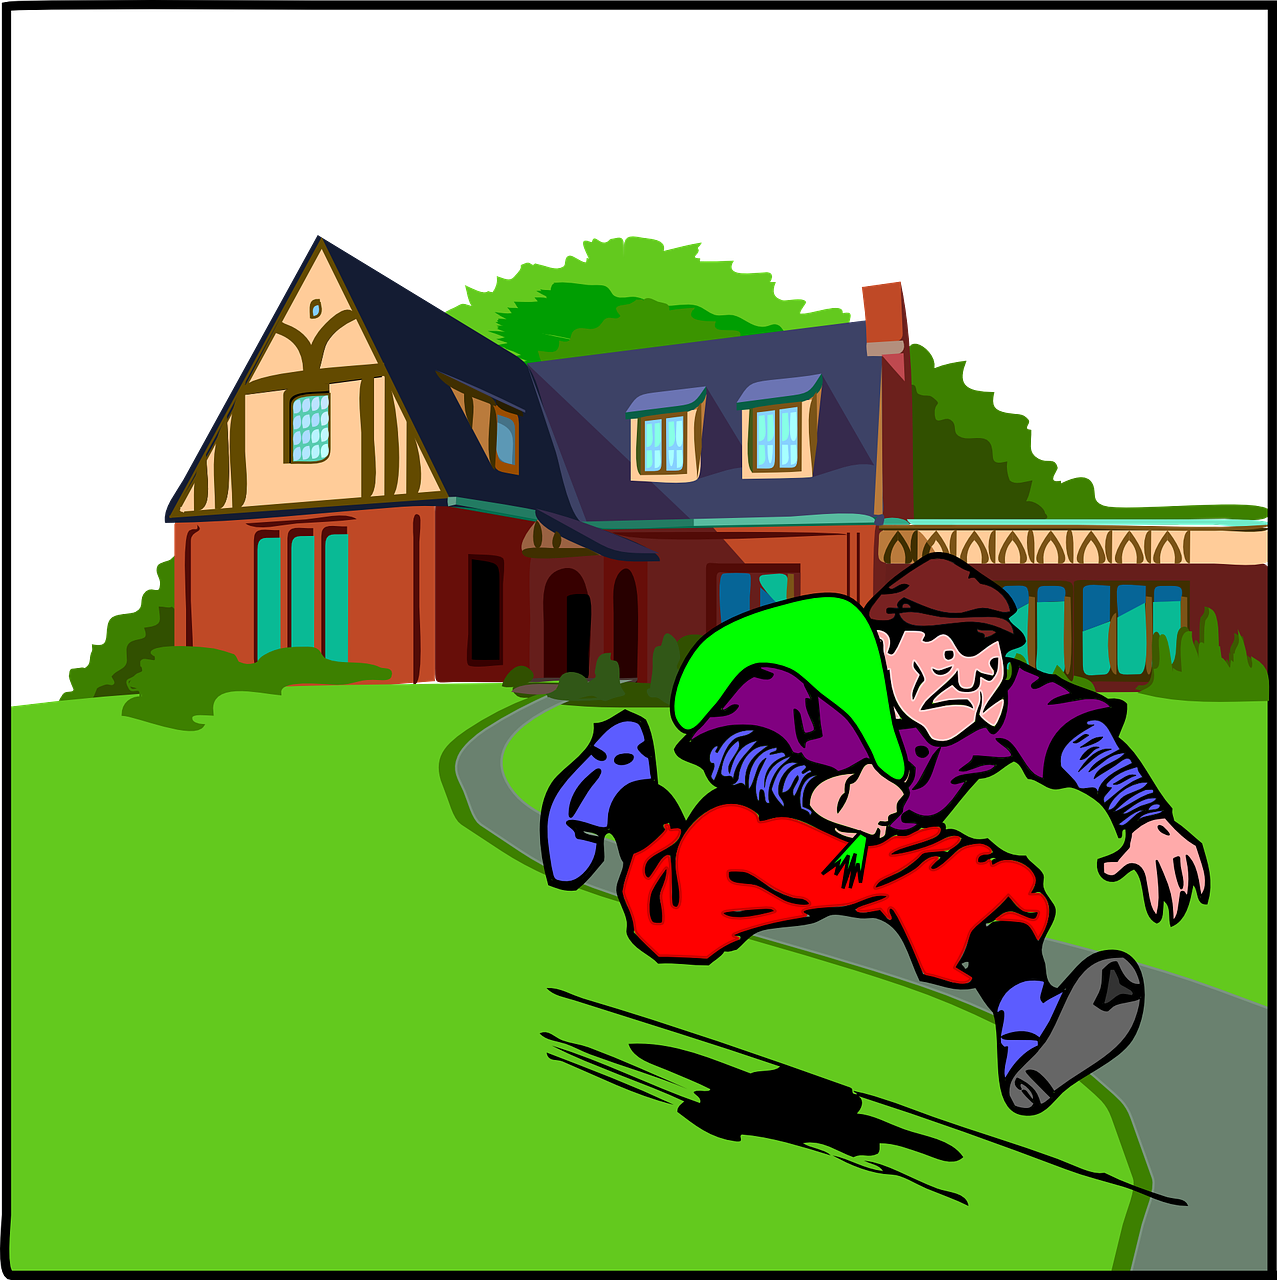 Burglar Thief Robber Robbery House  - Clker-Free-Vector-Images / Pixabay